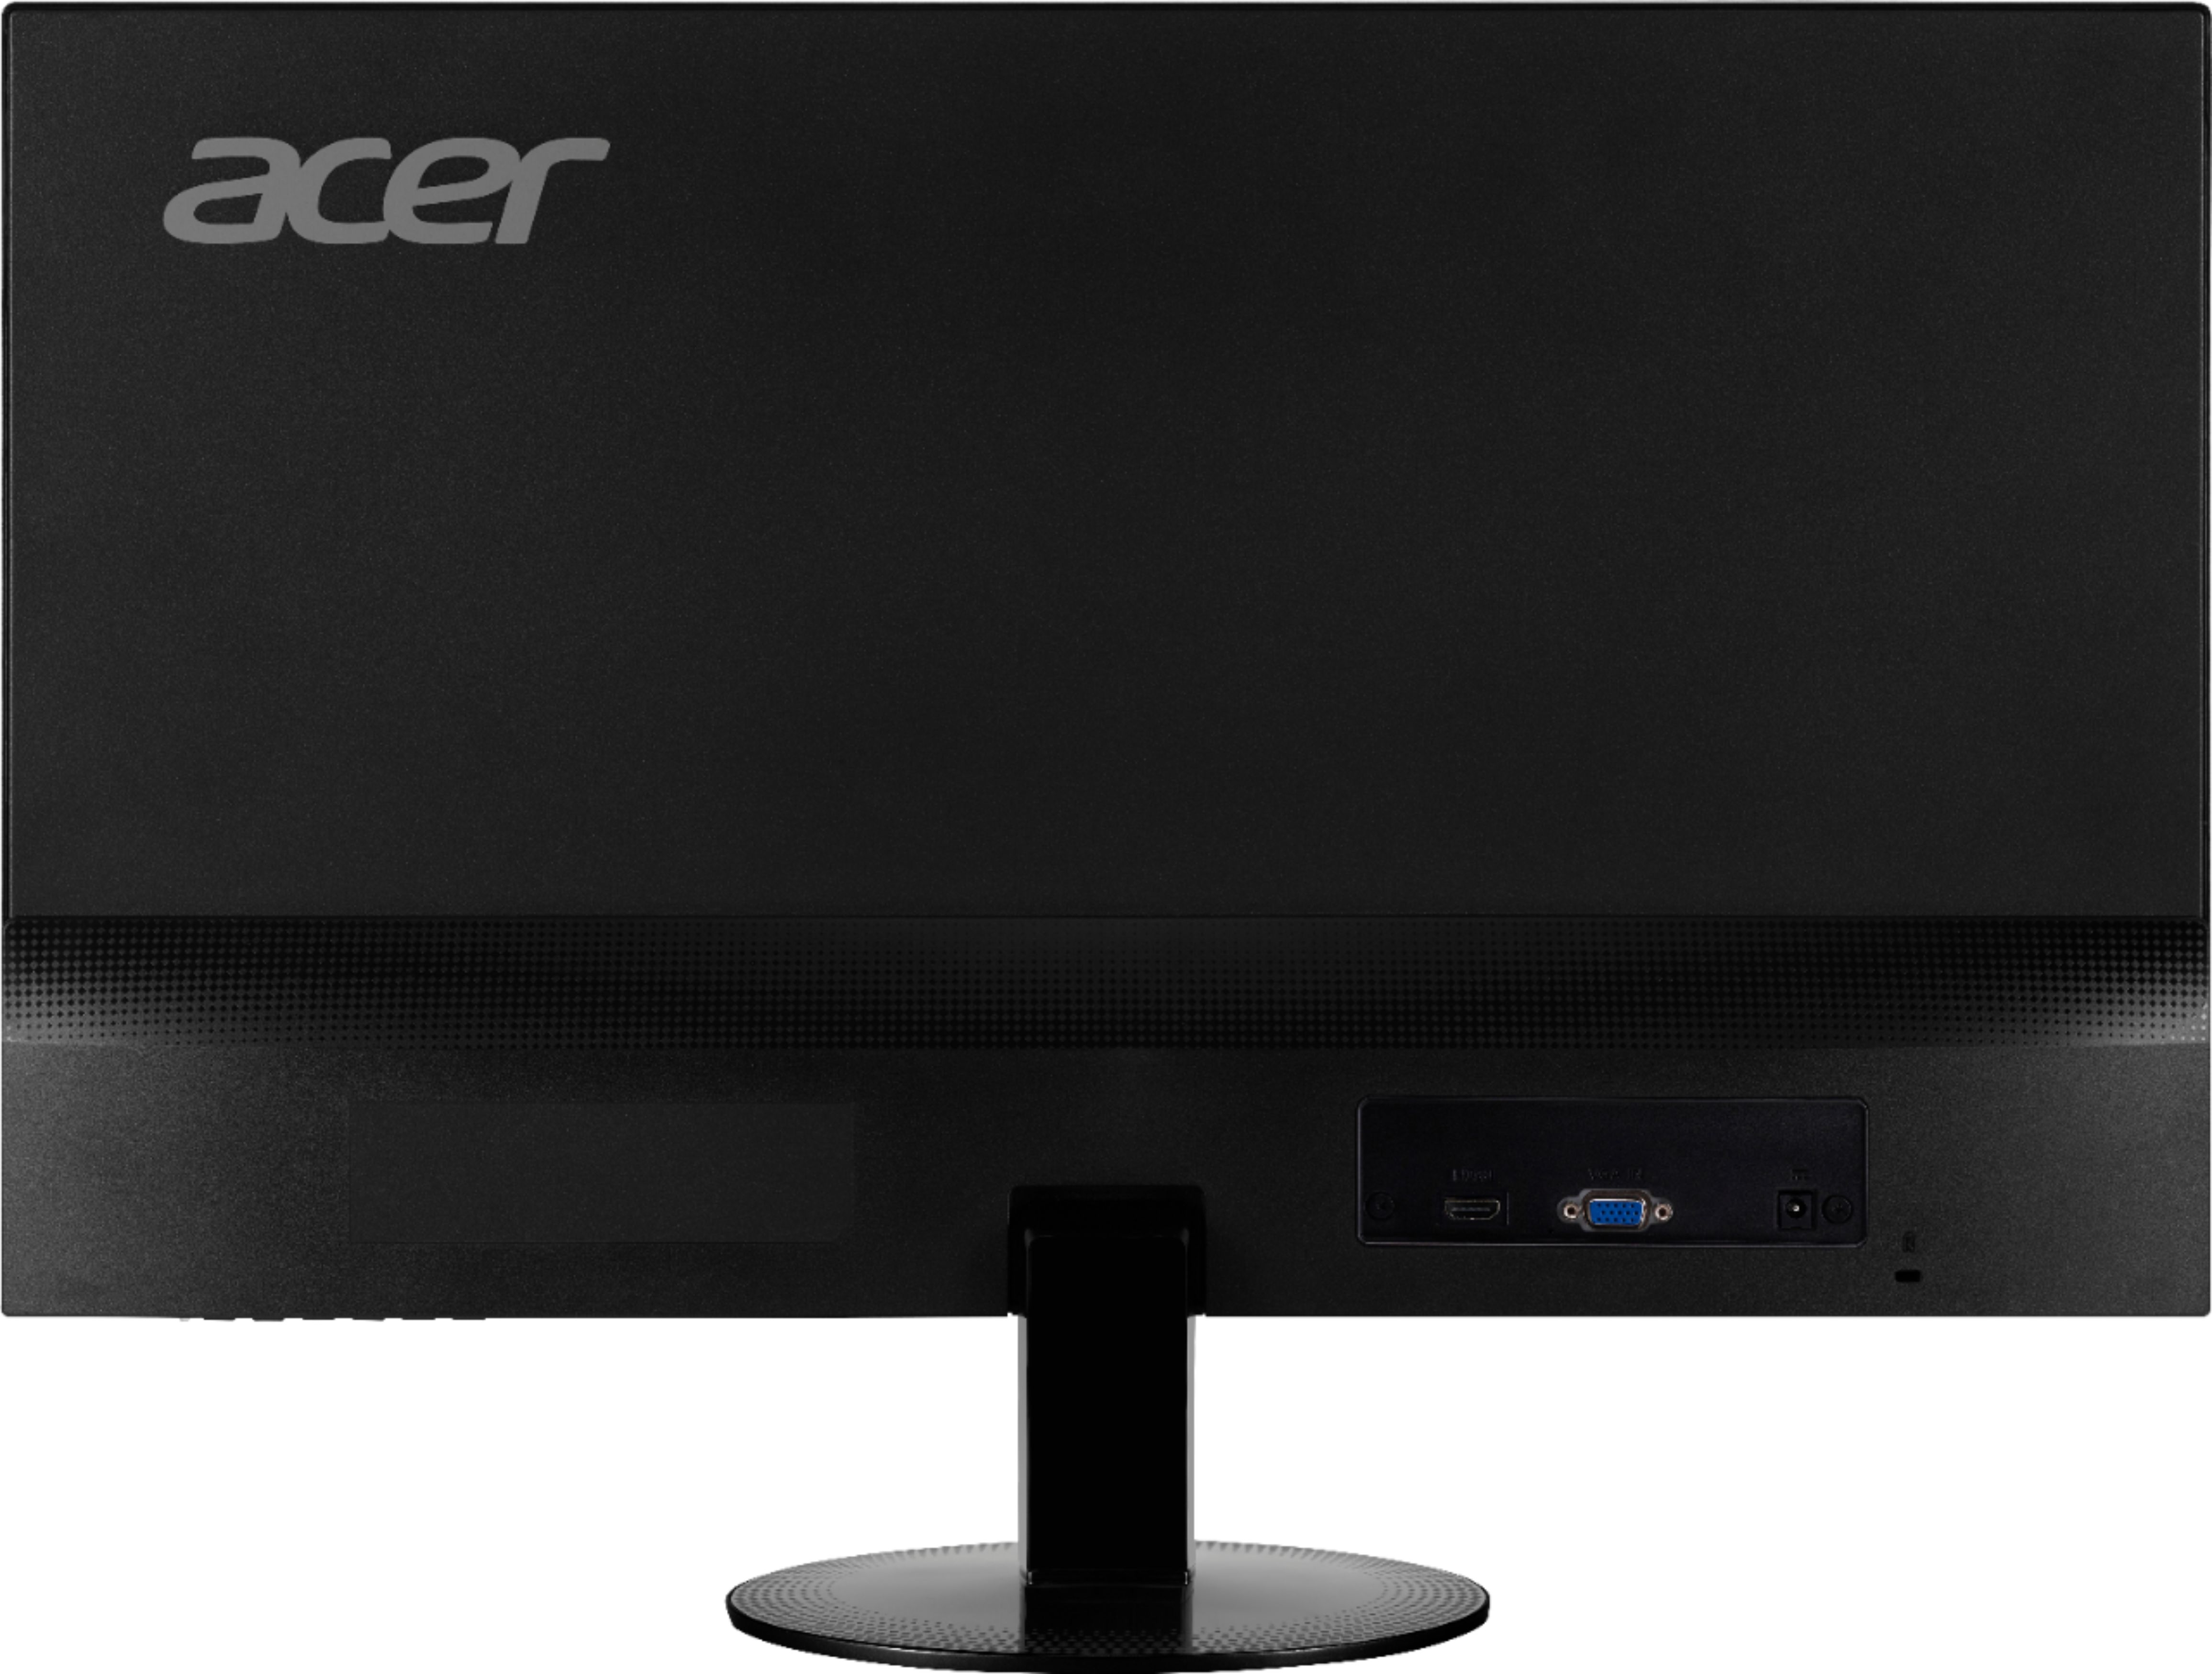 Back View: Acer - 27" IPS LED FHD FreeSync Monitor (HDMI, DVI)